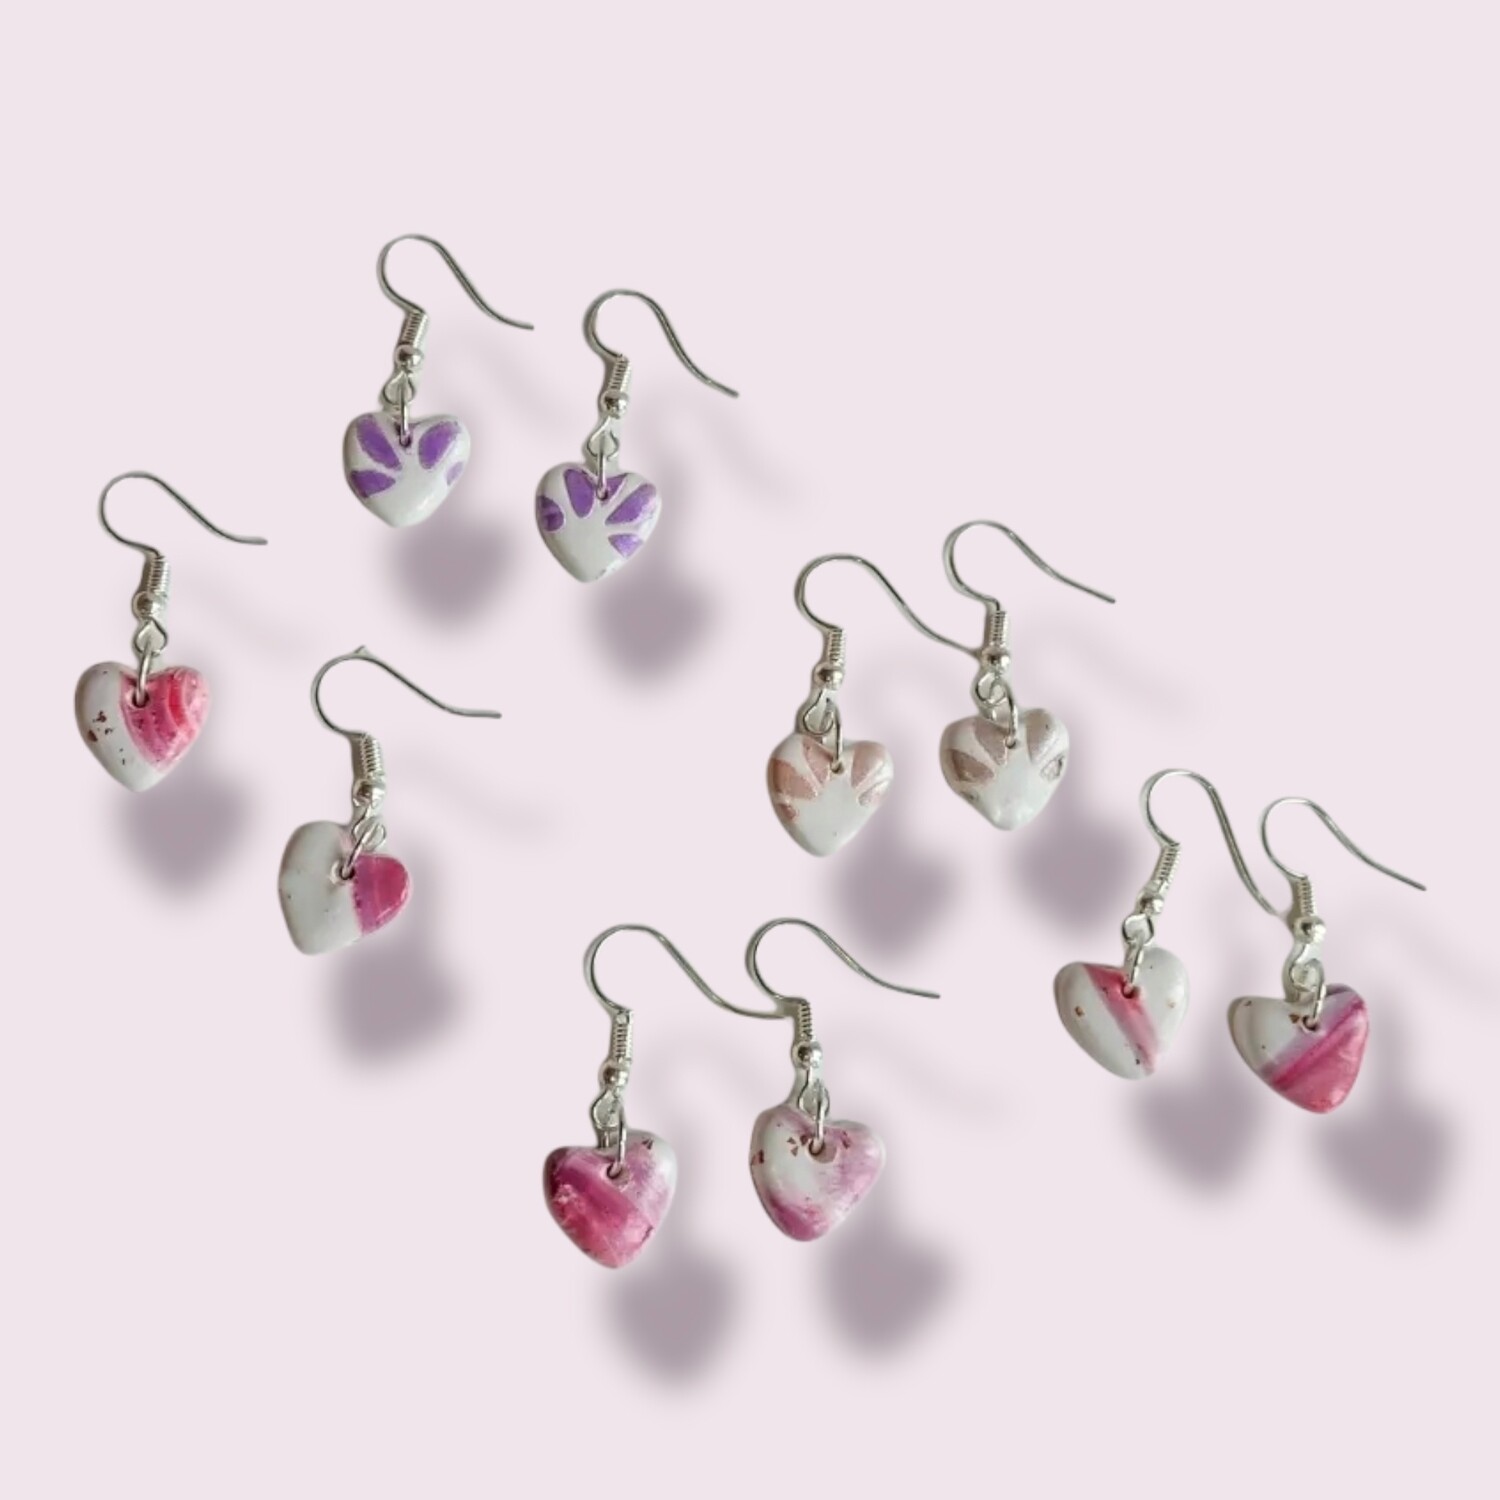 Valentines Day earrings